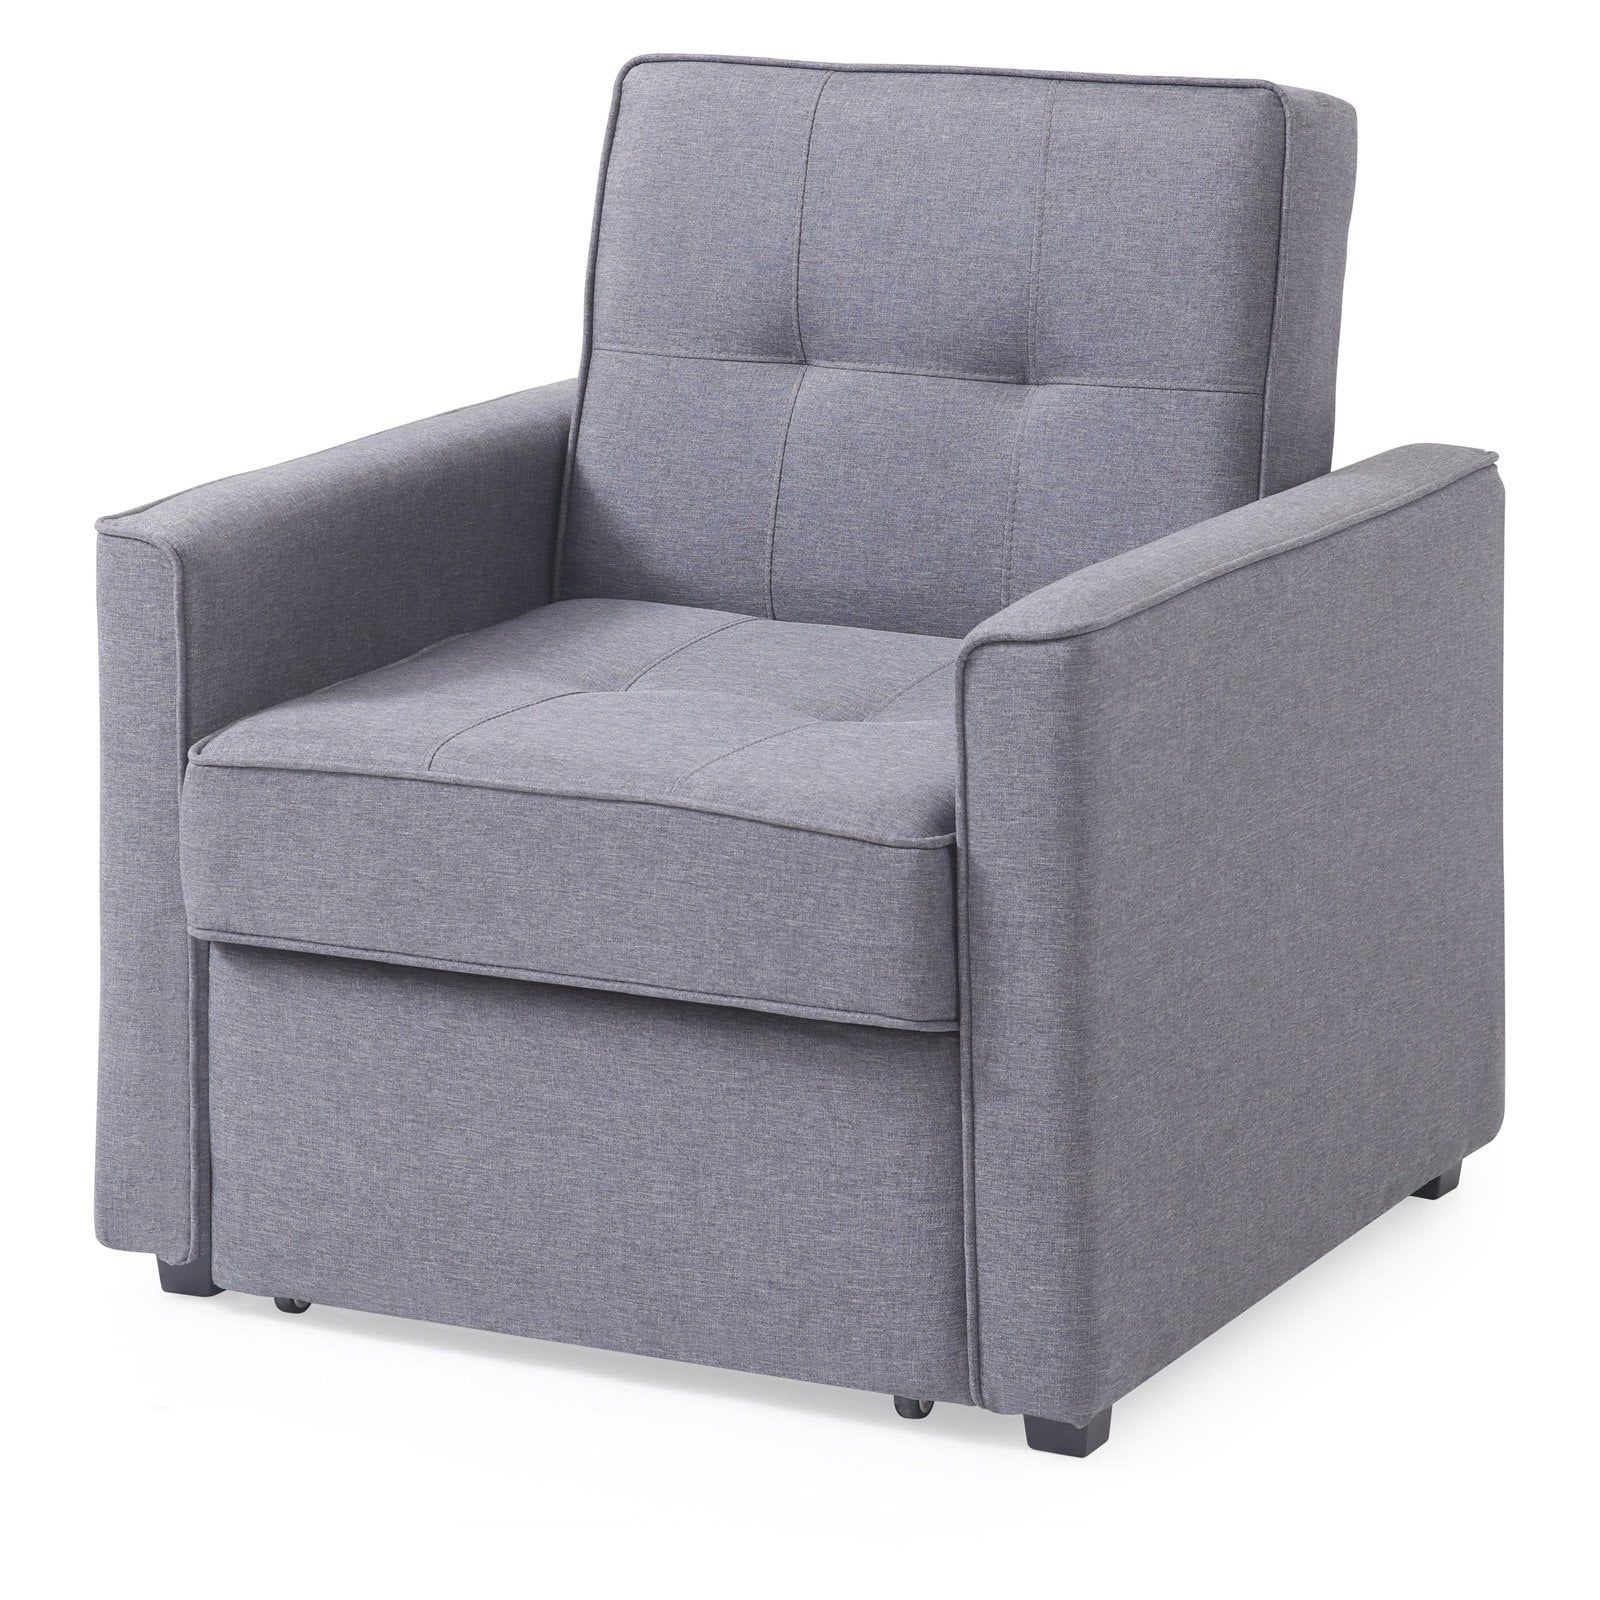 Gold Sparrow Chandler Gray Convertible Arm Chair Bed – Walmart For Convertible Light Gray Chair Beds (Gallery 4 of 20)